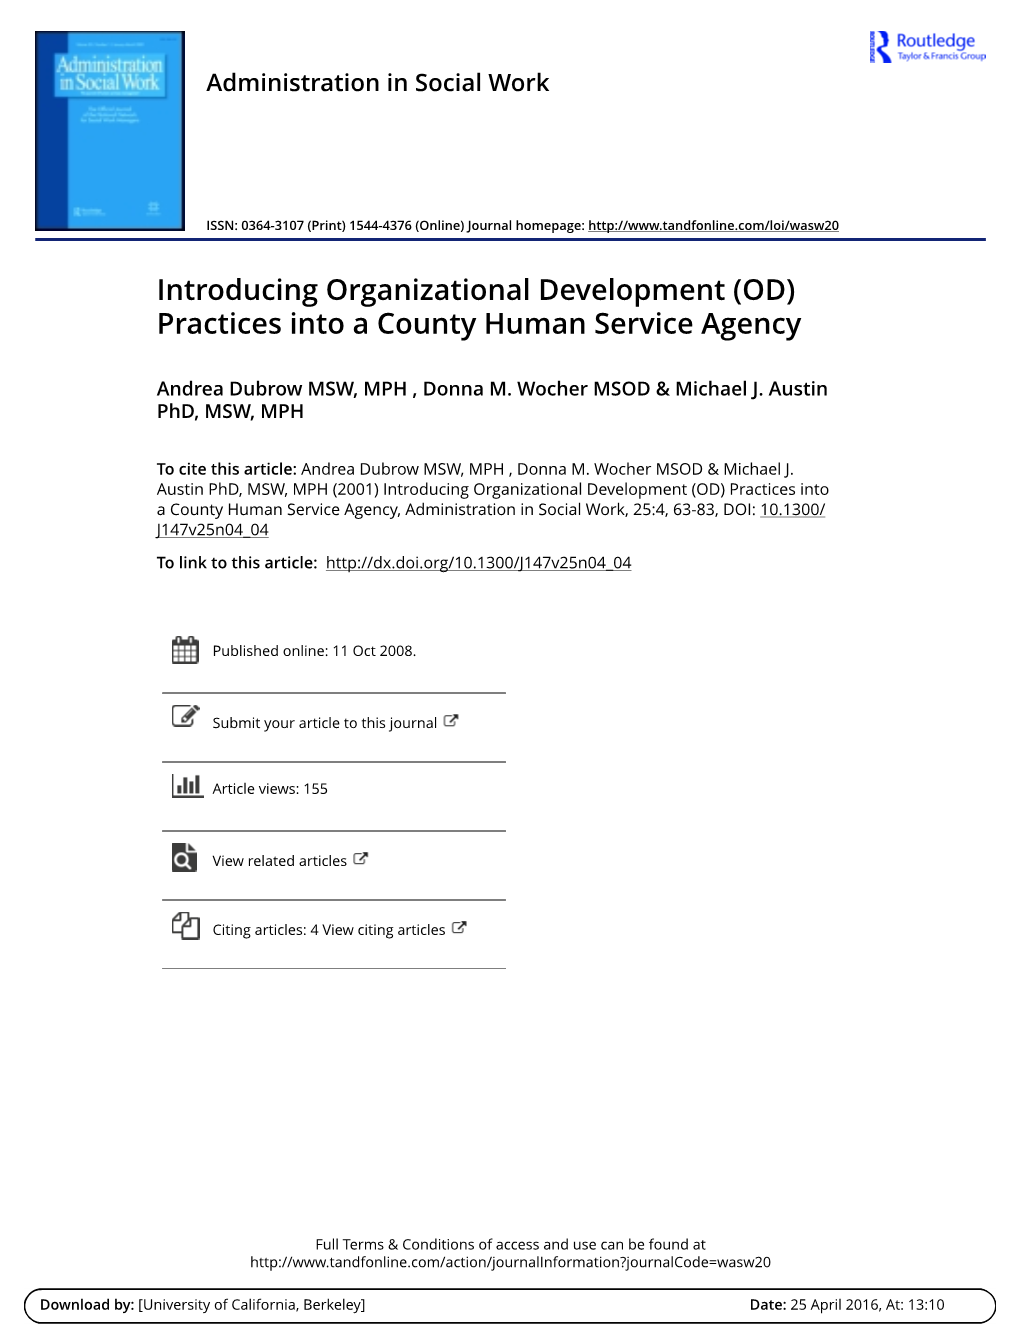 Introducing Organizational Development (OD) Practices Into a County Human Service Agency